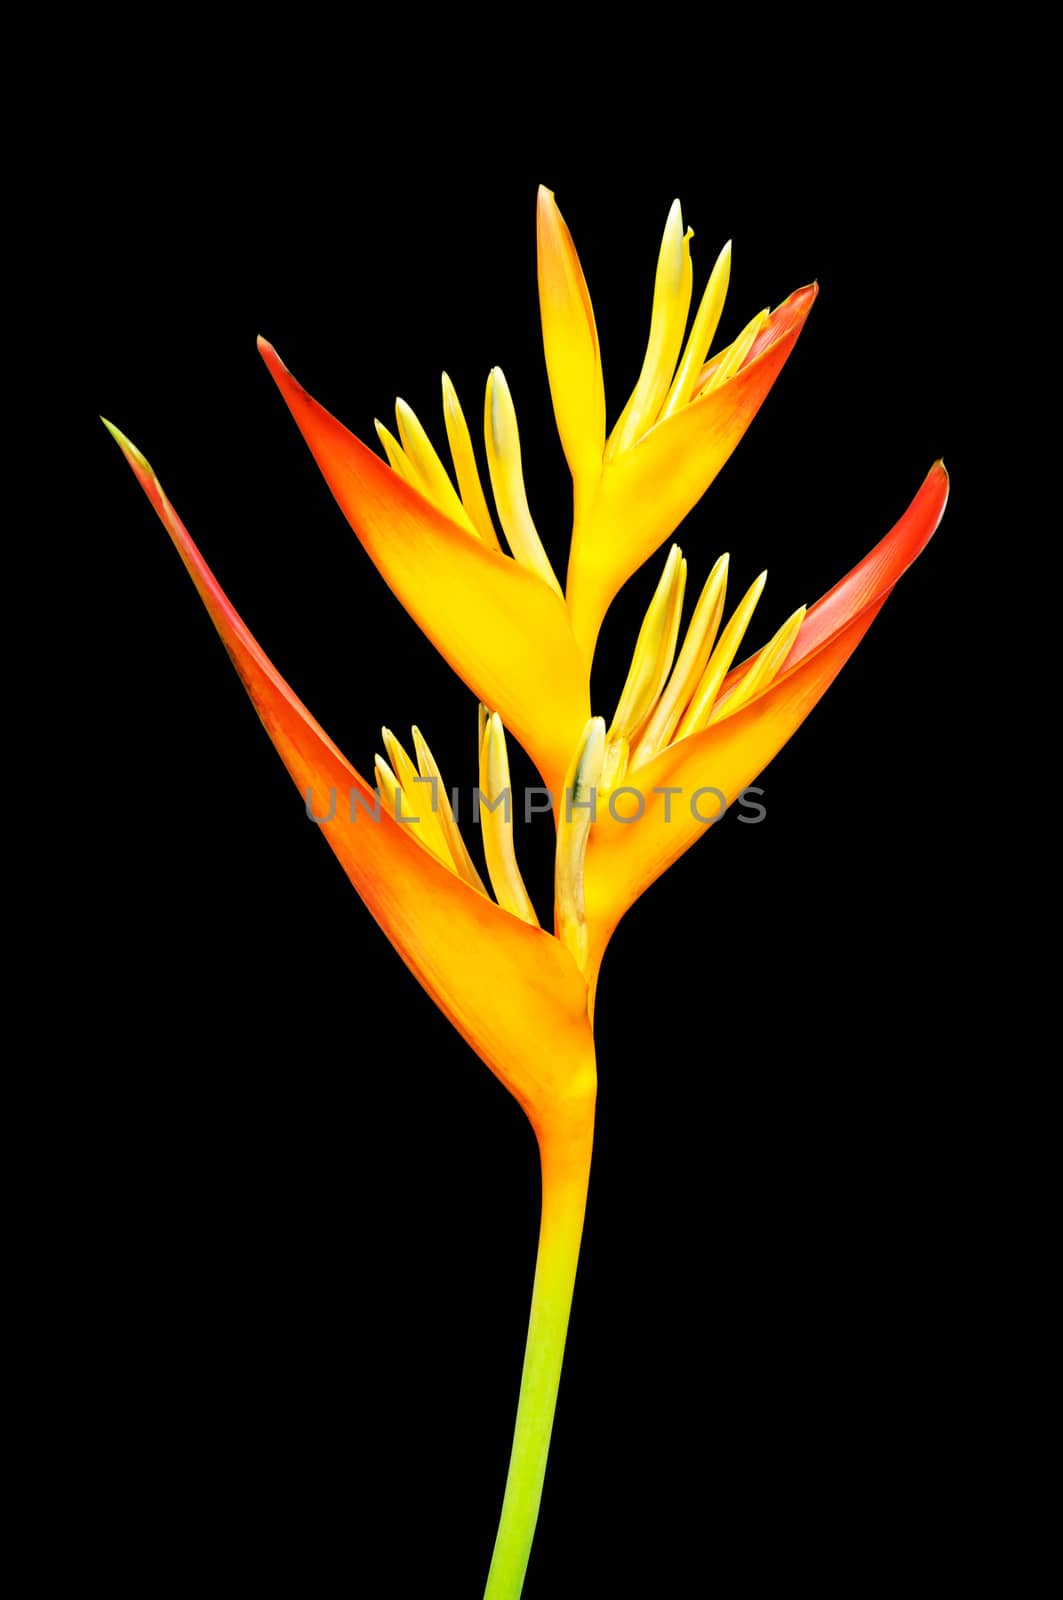 Bird of paradise flower by NuwatPhoto